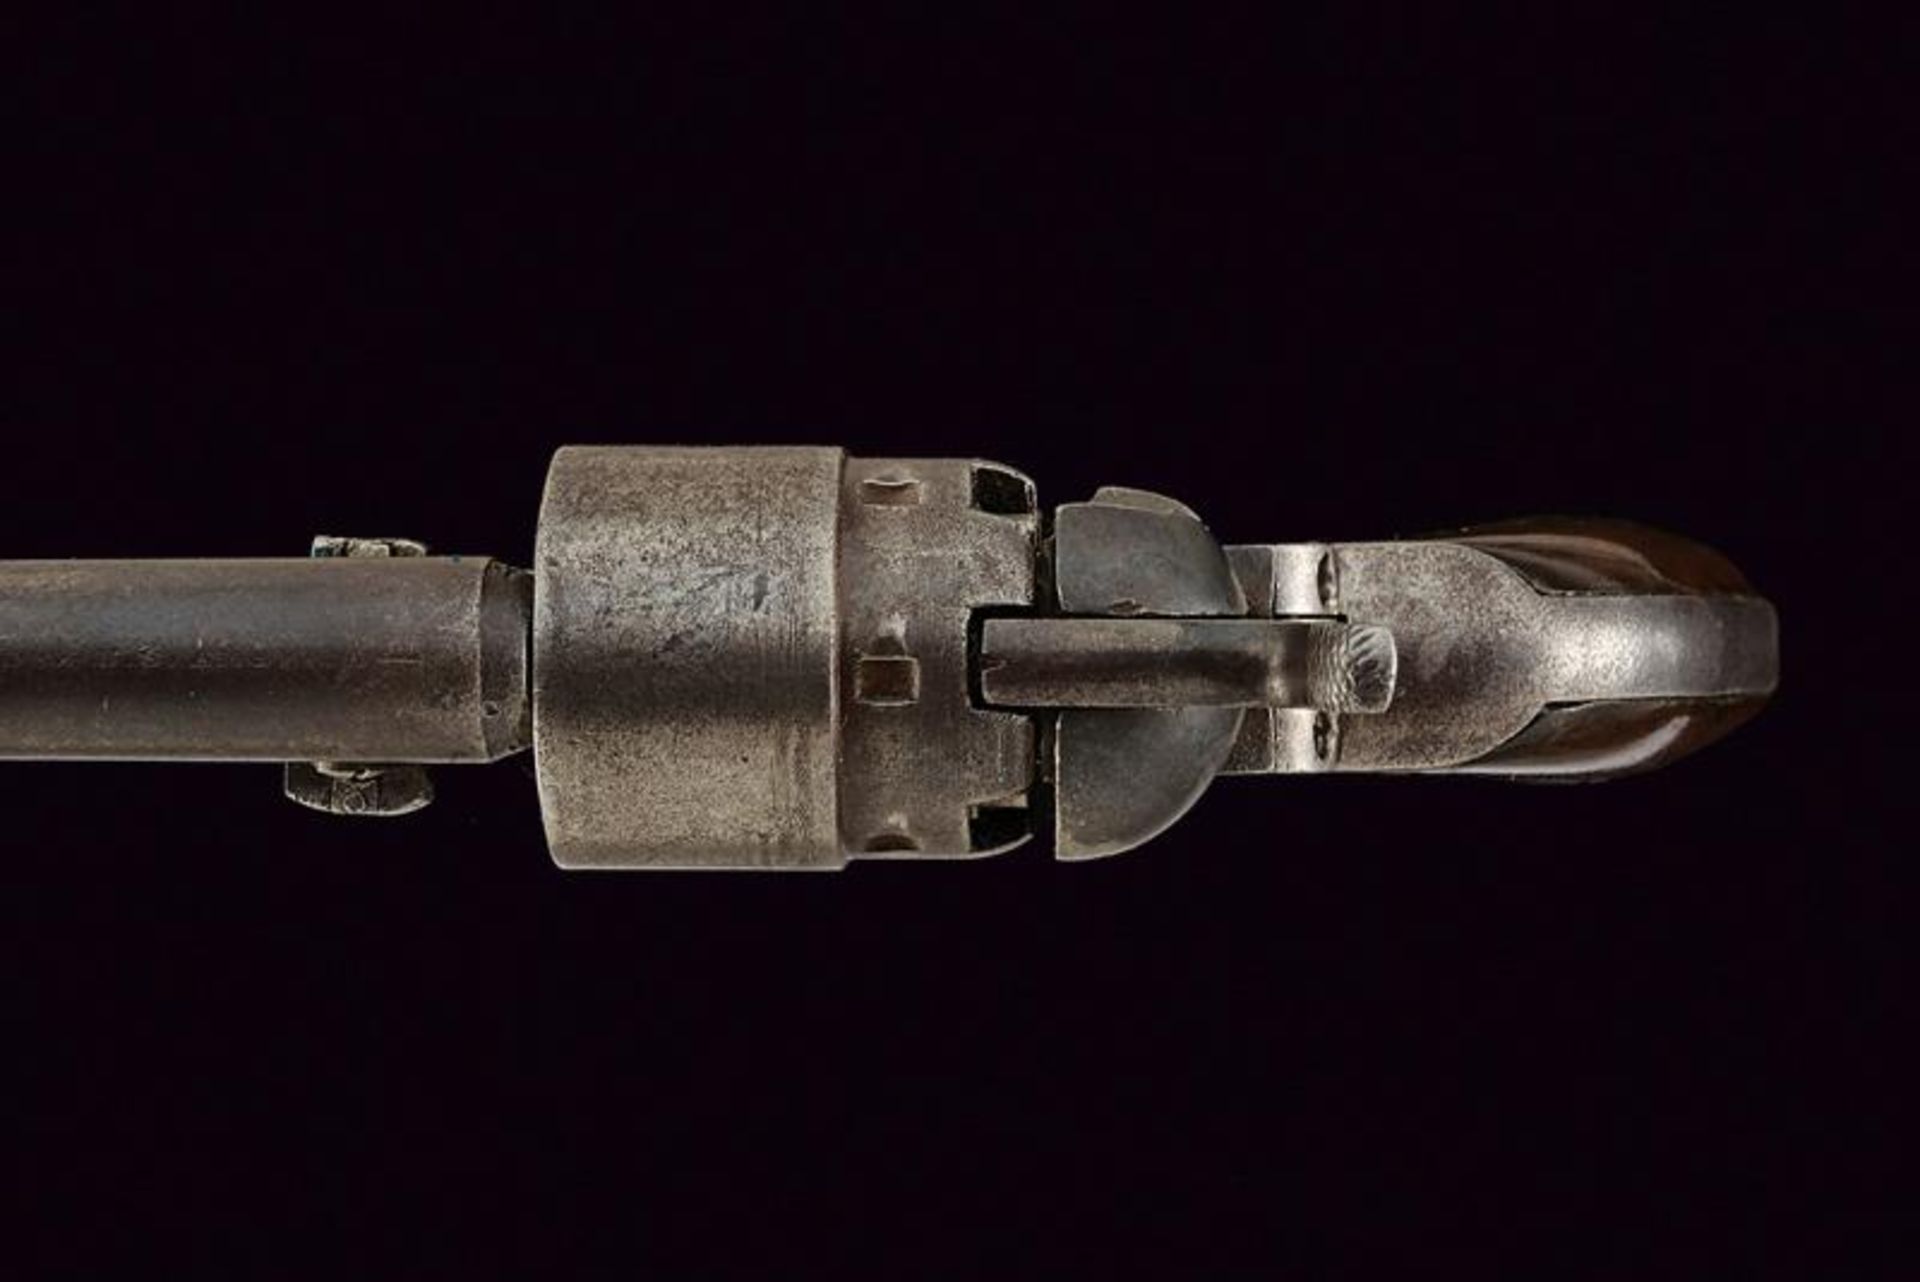 A 1860 Colt Model Army Revolver - Image 5 of 5